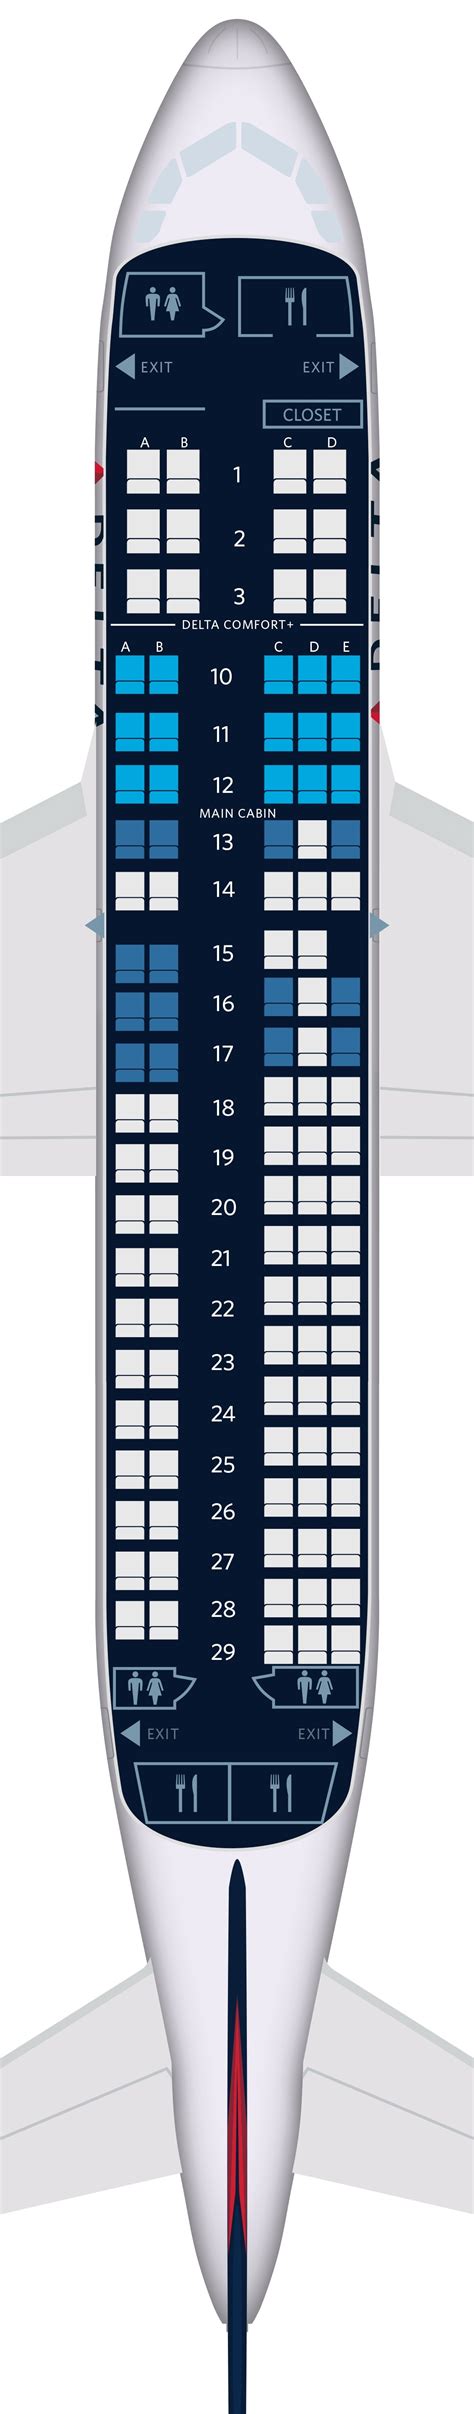 Airbus a220 100 seat map. Less CO2, less noise. Our latest generation aircraft plays a key role in reducing our environmental footprint. Designed with lighter materials, new engines and an optimized fuel system, it offers unparalleled energy performance. The A220-300 in numbers*: 20% less fuel. 20% less CO 2. 34% less noise. *Compared to the A318 and A319 that it replaces. 